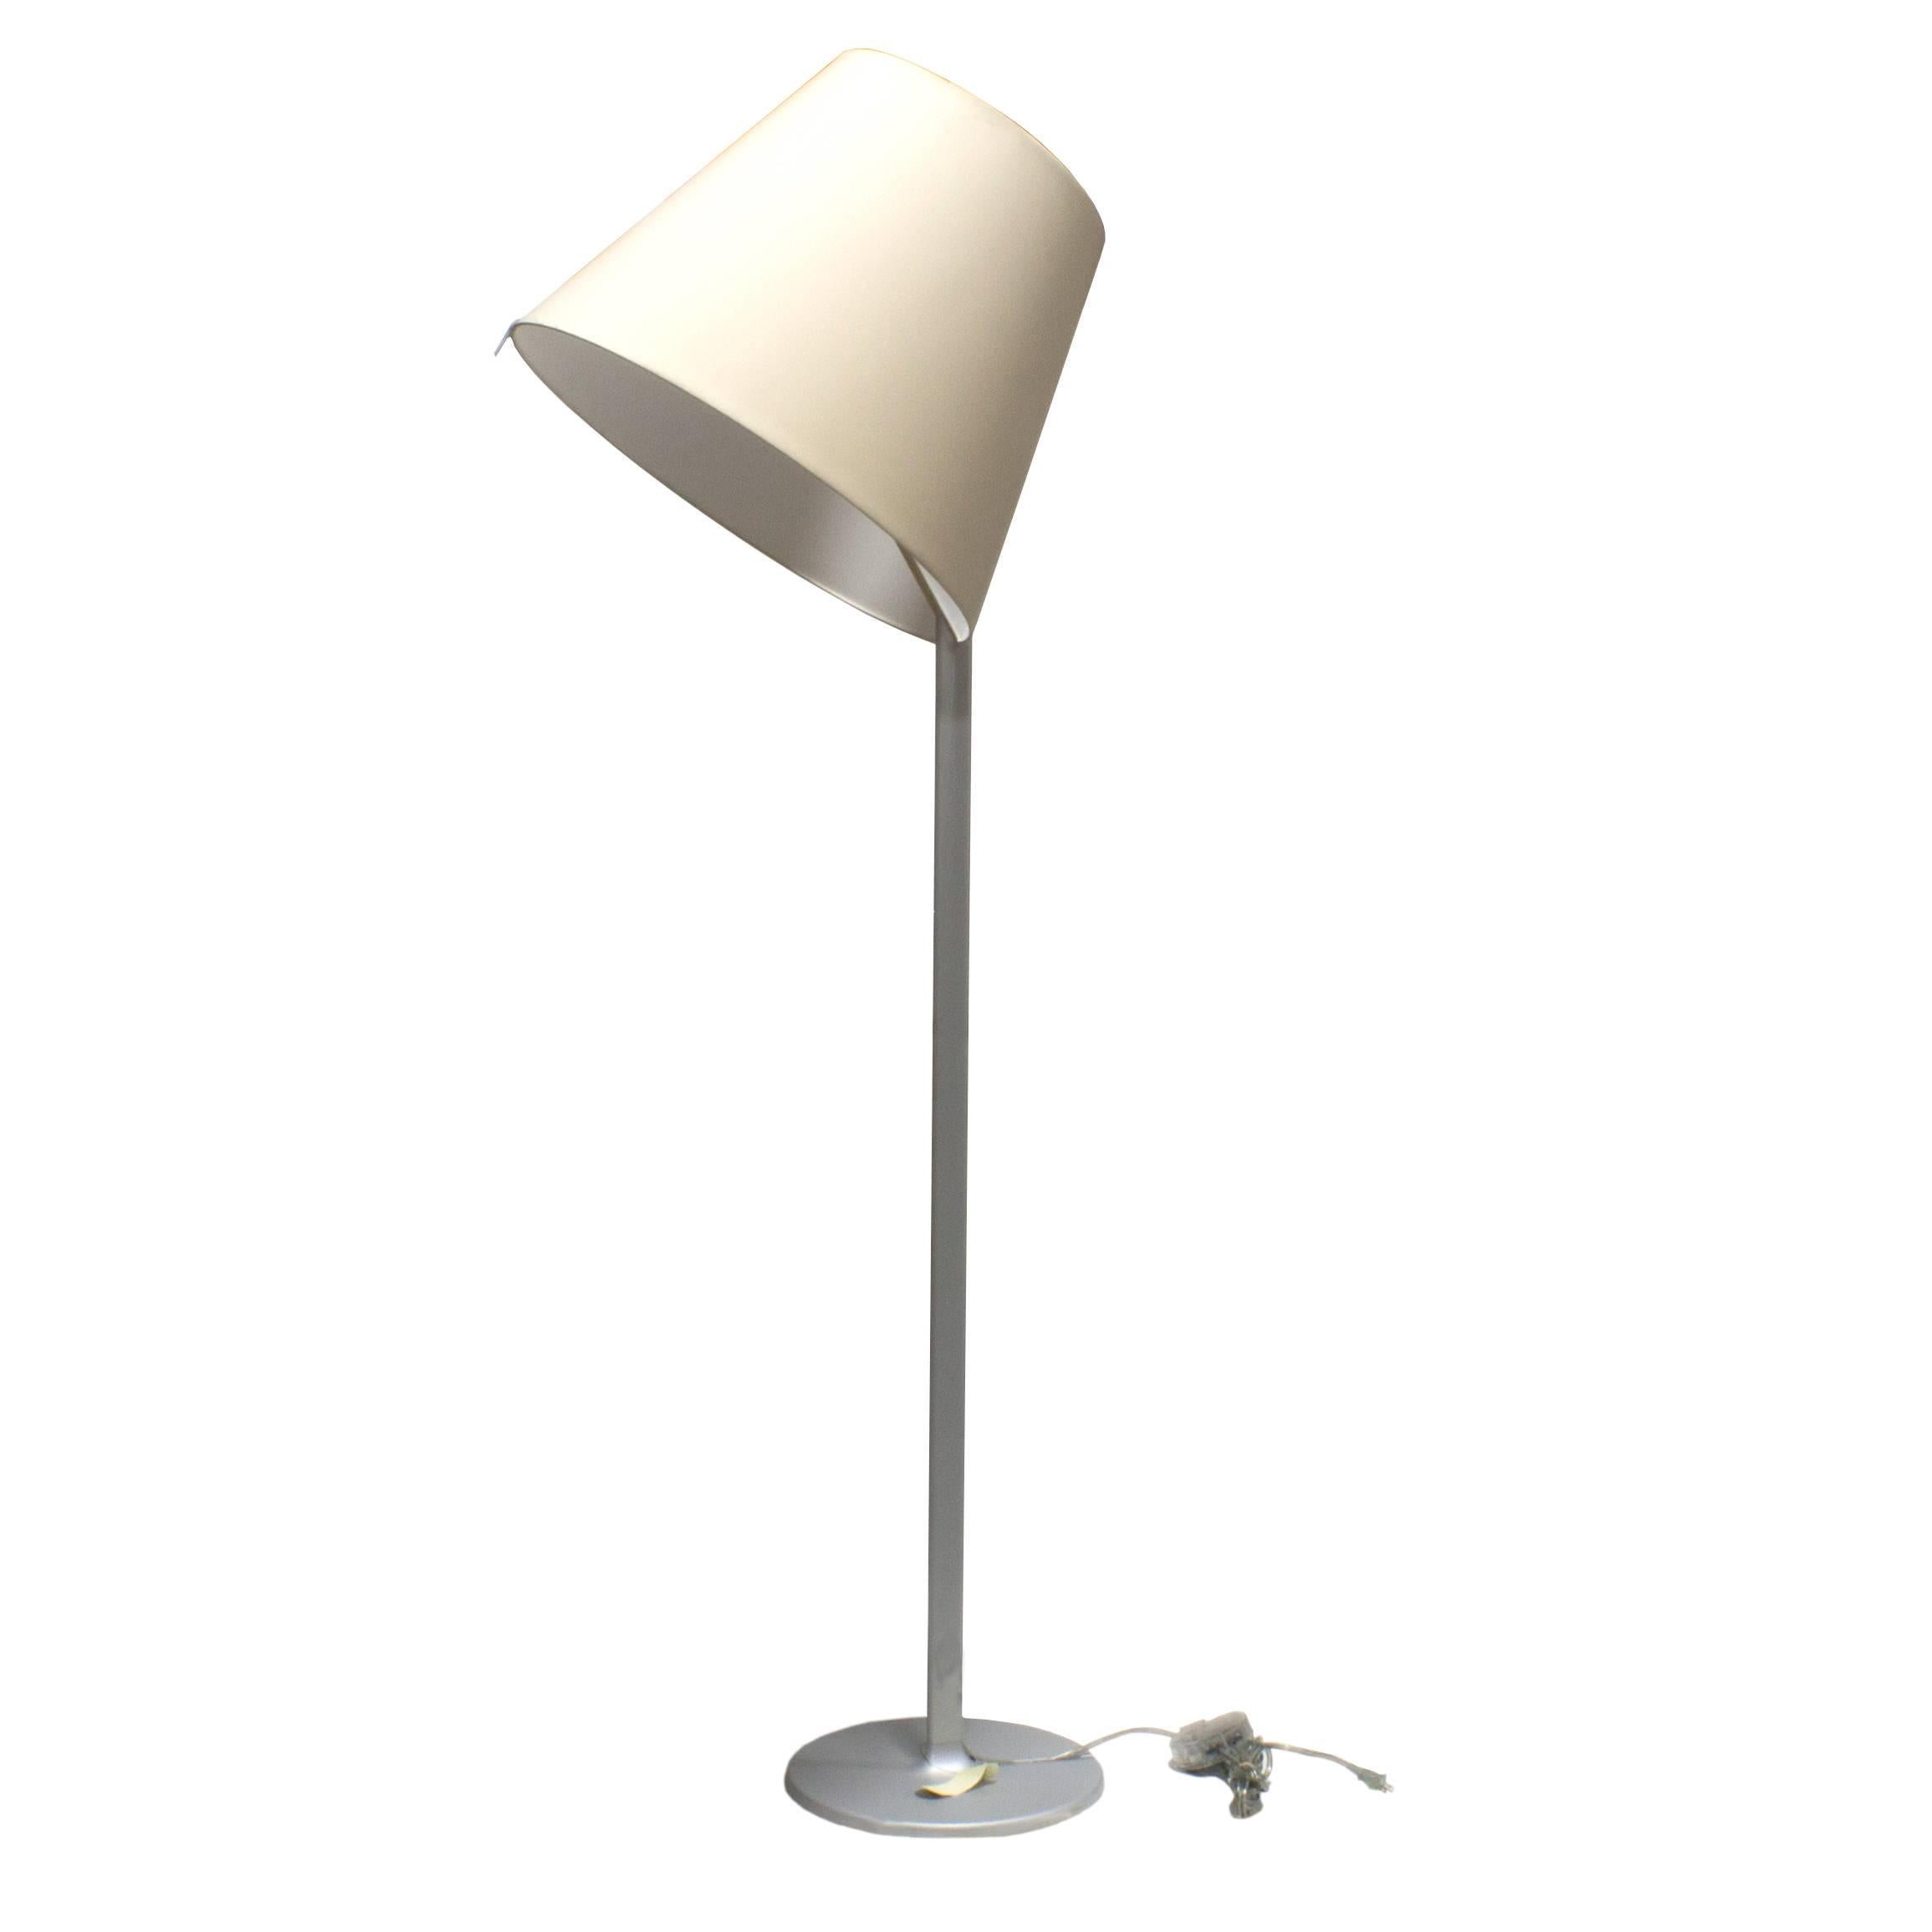 The Melampo mega floor lamp is a true chameleon: It masquerades as a standard floor lamp with a regular shade, but the 22.5